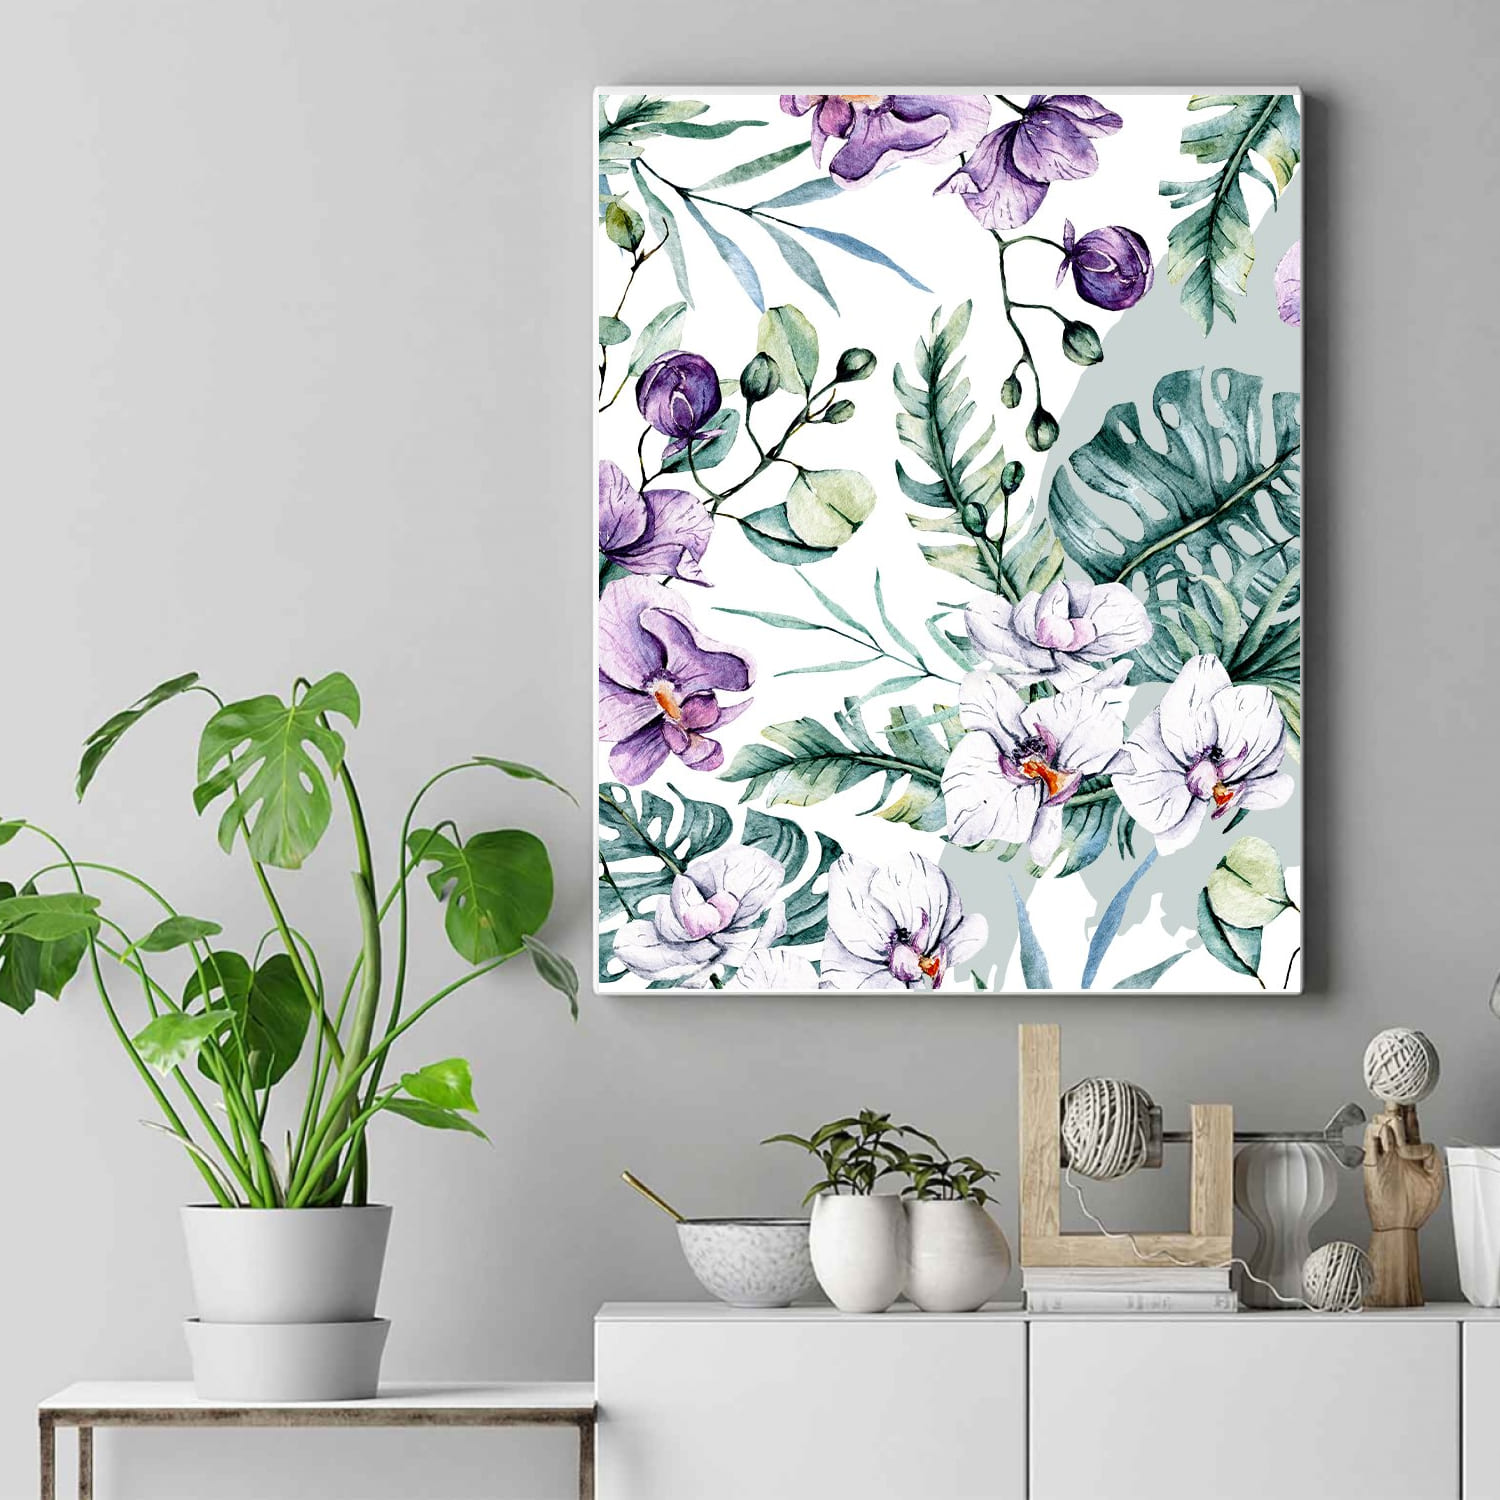 Floral tropical illustrations hand painting.